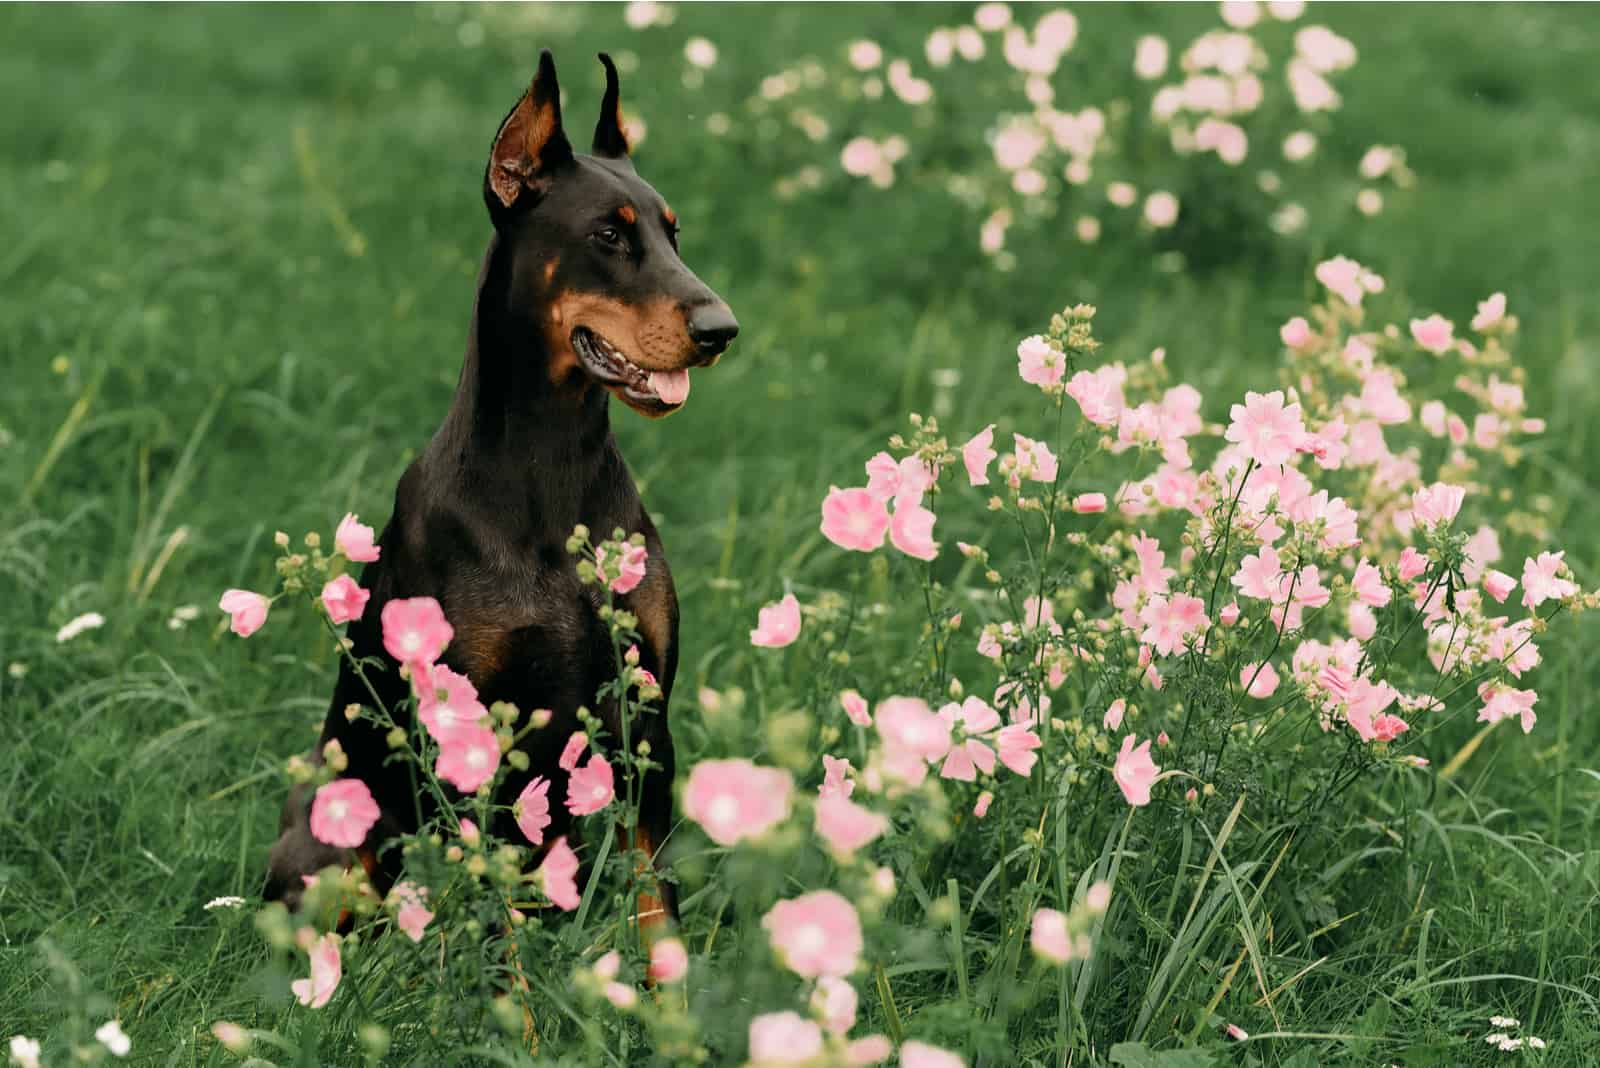 dog sitting in grass with flowers